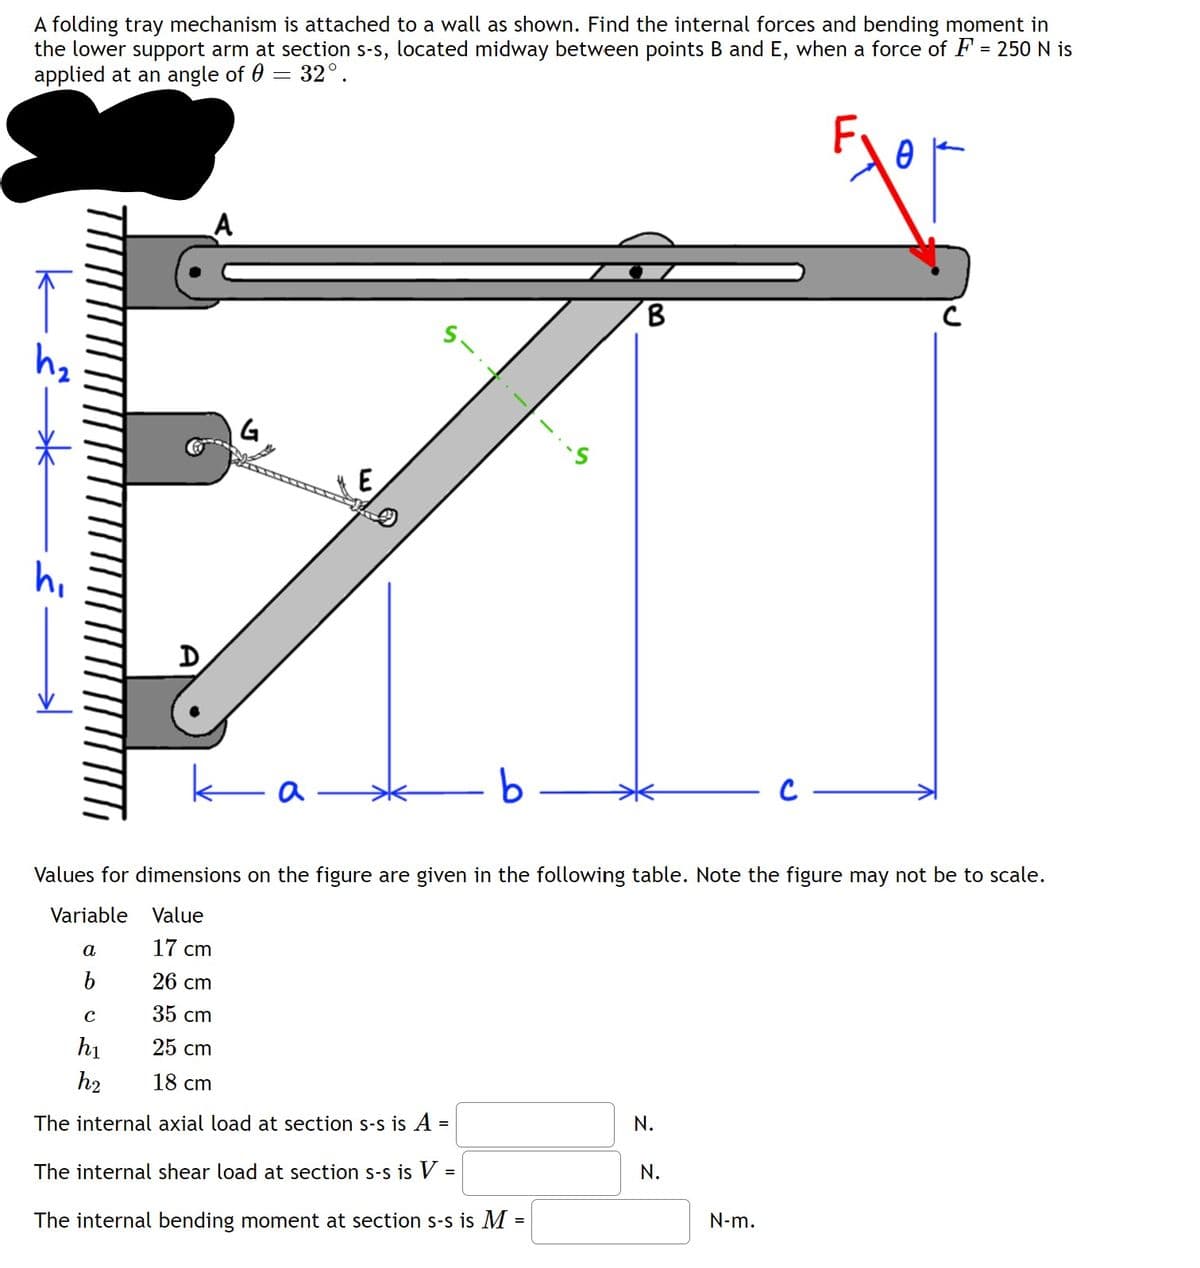 A folding tray mechanism is attached to a wall as shown. Find the internal forces and bending moment in
the lower support arm at section s-s, located midway between points B and E, when a force of F = 250 N is
applied at an angle of 0 = 32°.
A
B.
's
E
D
k a-
b –
Values for dimensions on the figure are given in the following table. Note the figure may not be to scale.
Variable
Value
a
17 cm
b
26 cm
35 cm
hi
25 cm
h2
18 cm
The internal axial load at section s-s is A =
N.
The internal shear load at section s-s is V =
N.
The internal bending moment at section s-s is M =
N-m.
